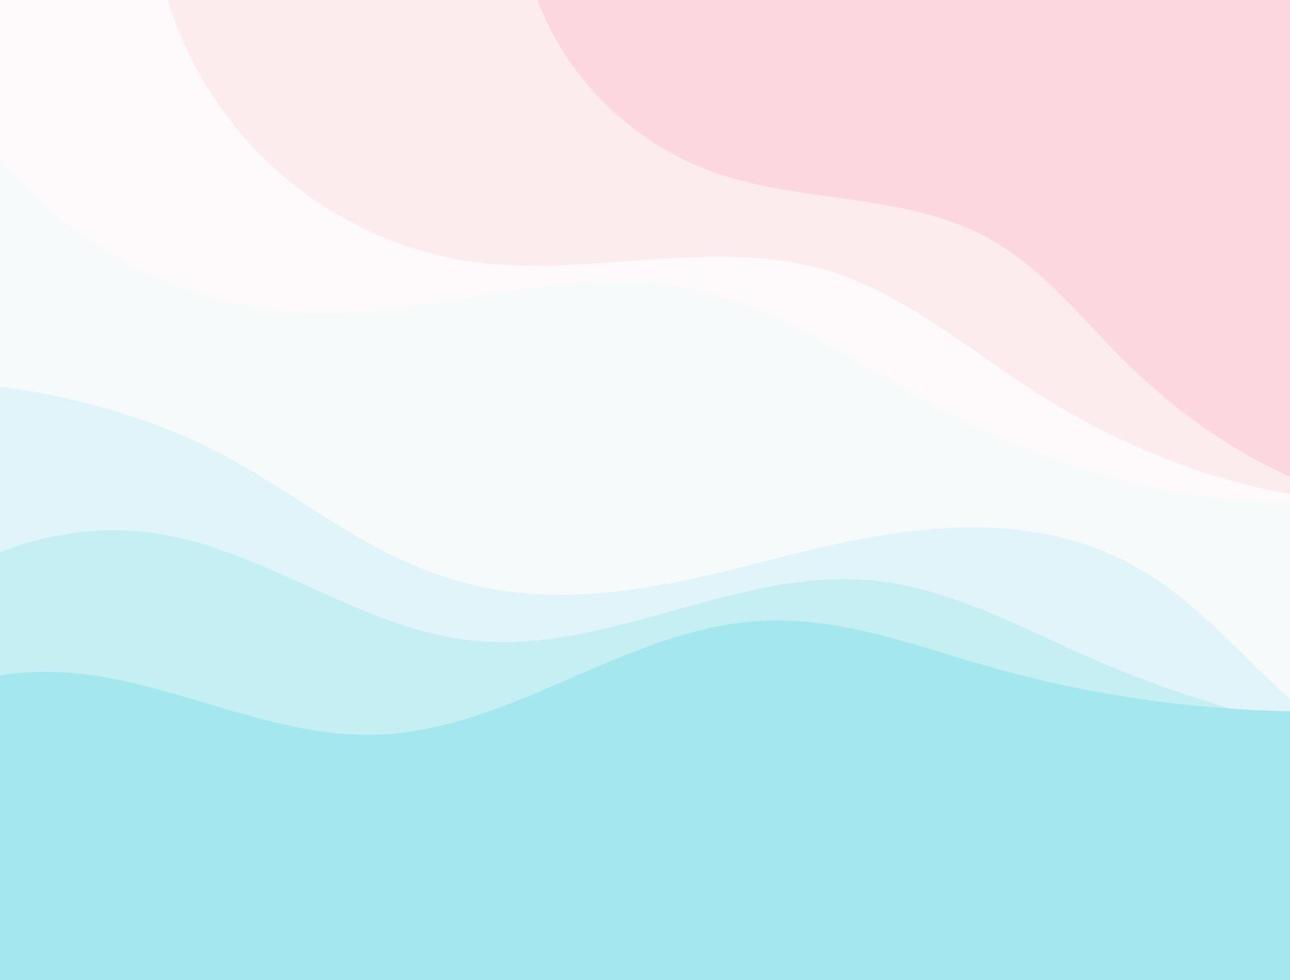 NICE abstract pastel color abstract background. used for wallpaper and dicorective templates design vector